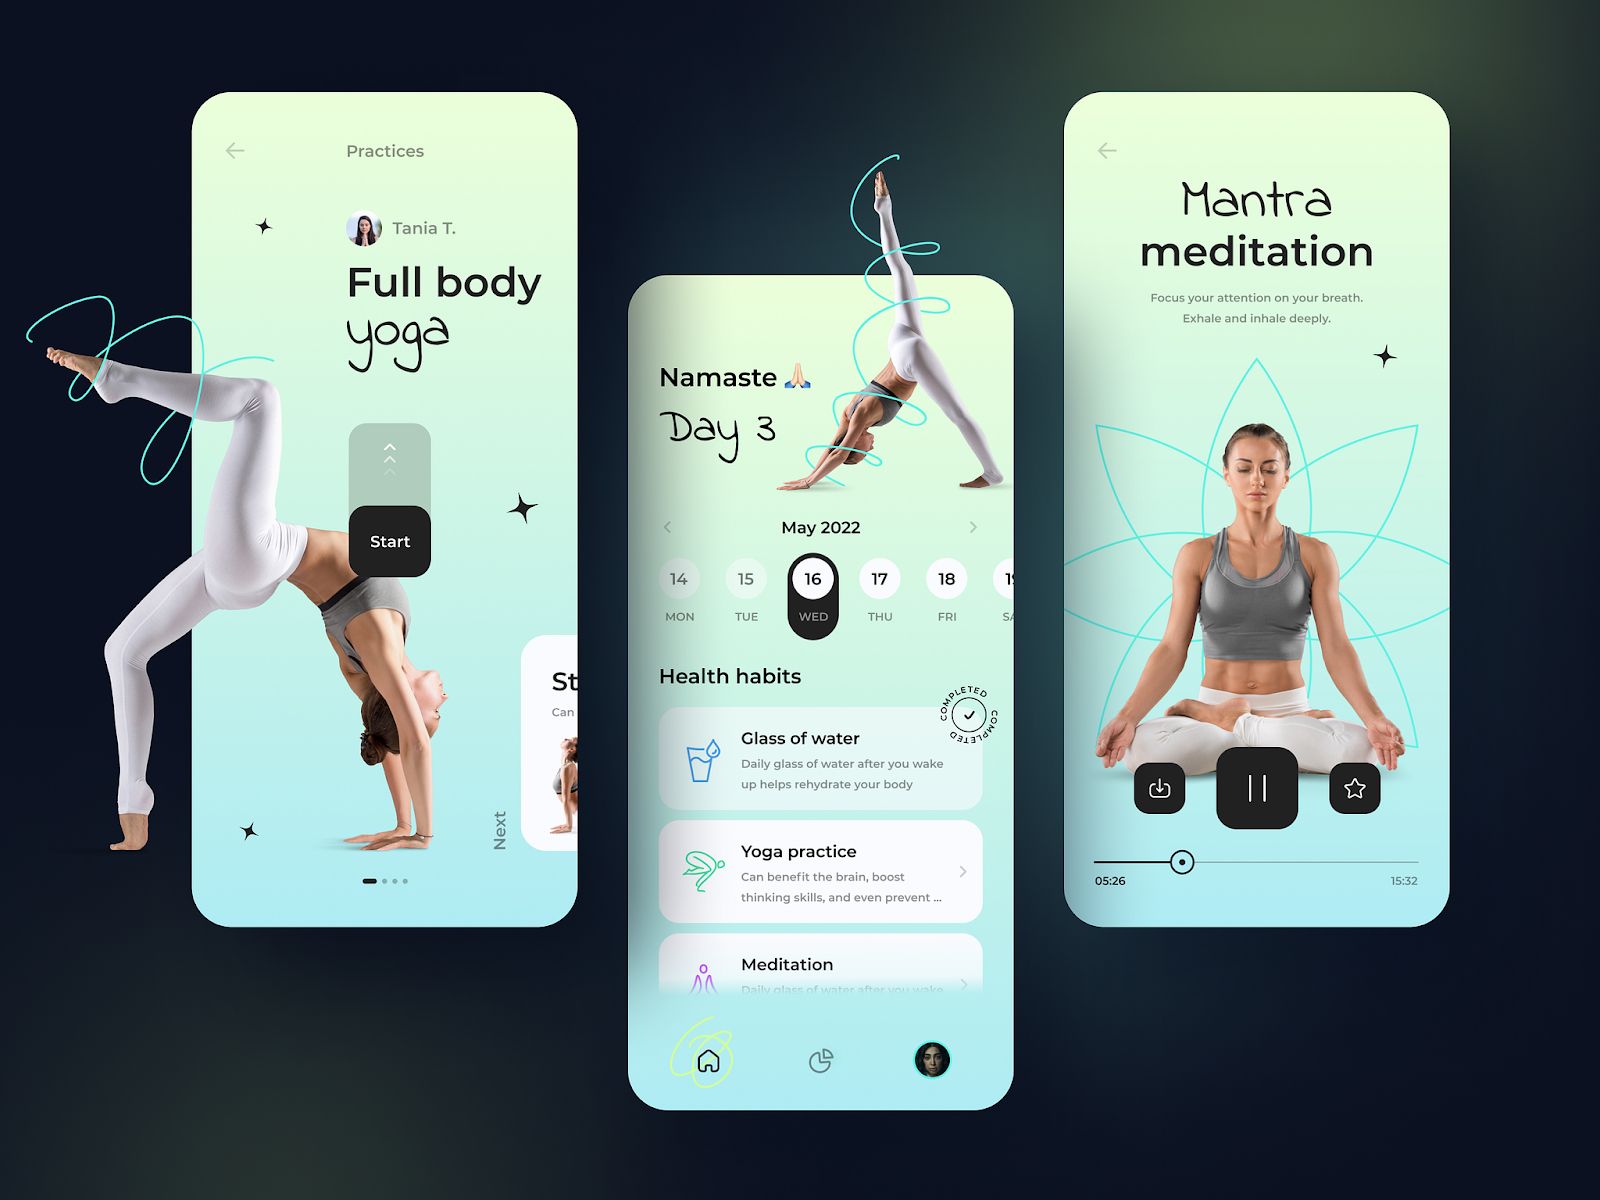 Yoga app offer a variety of guided classes with video demonstrations